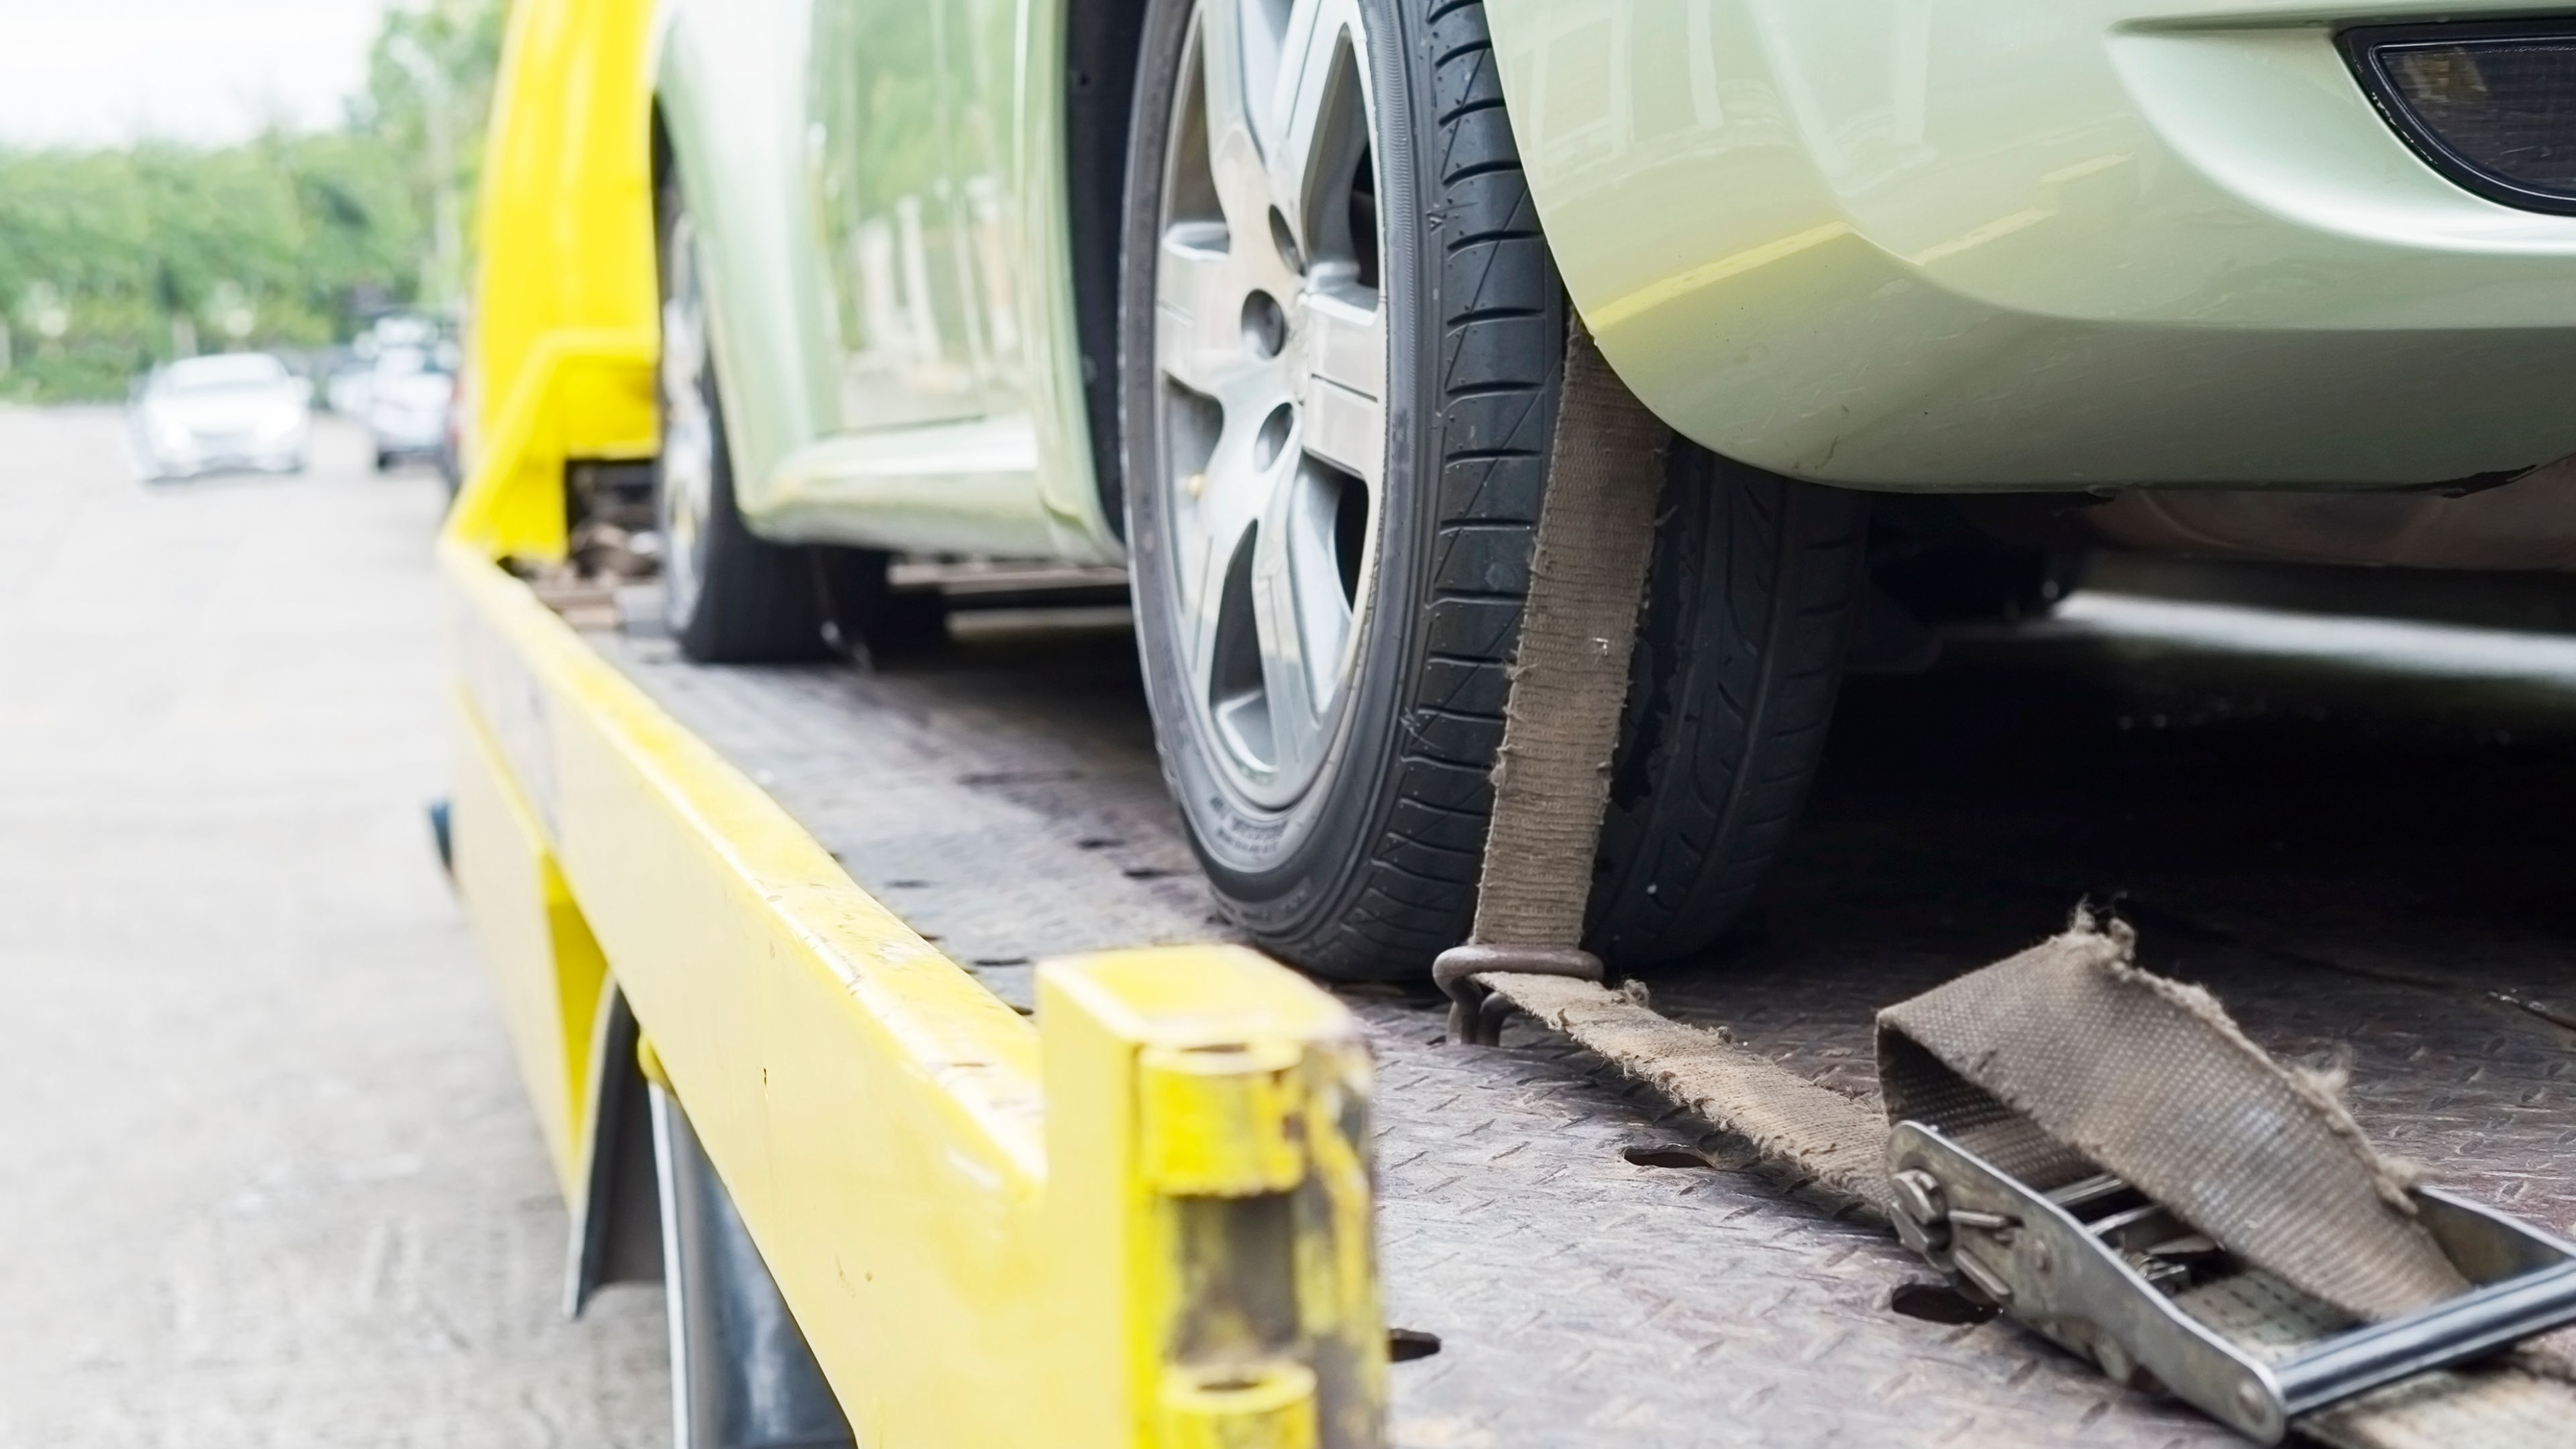 5 Cases Where You Should Call a Tow Truck